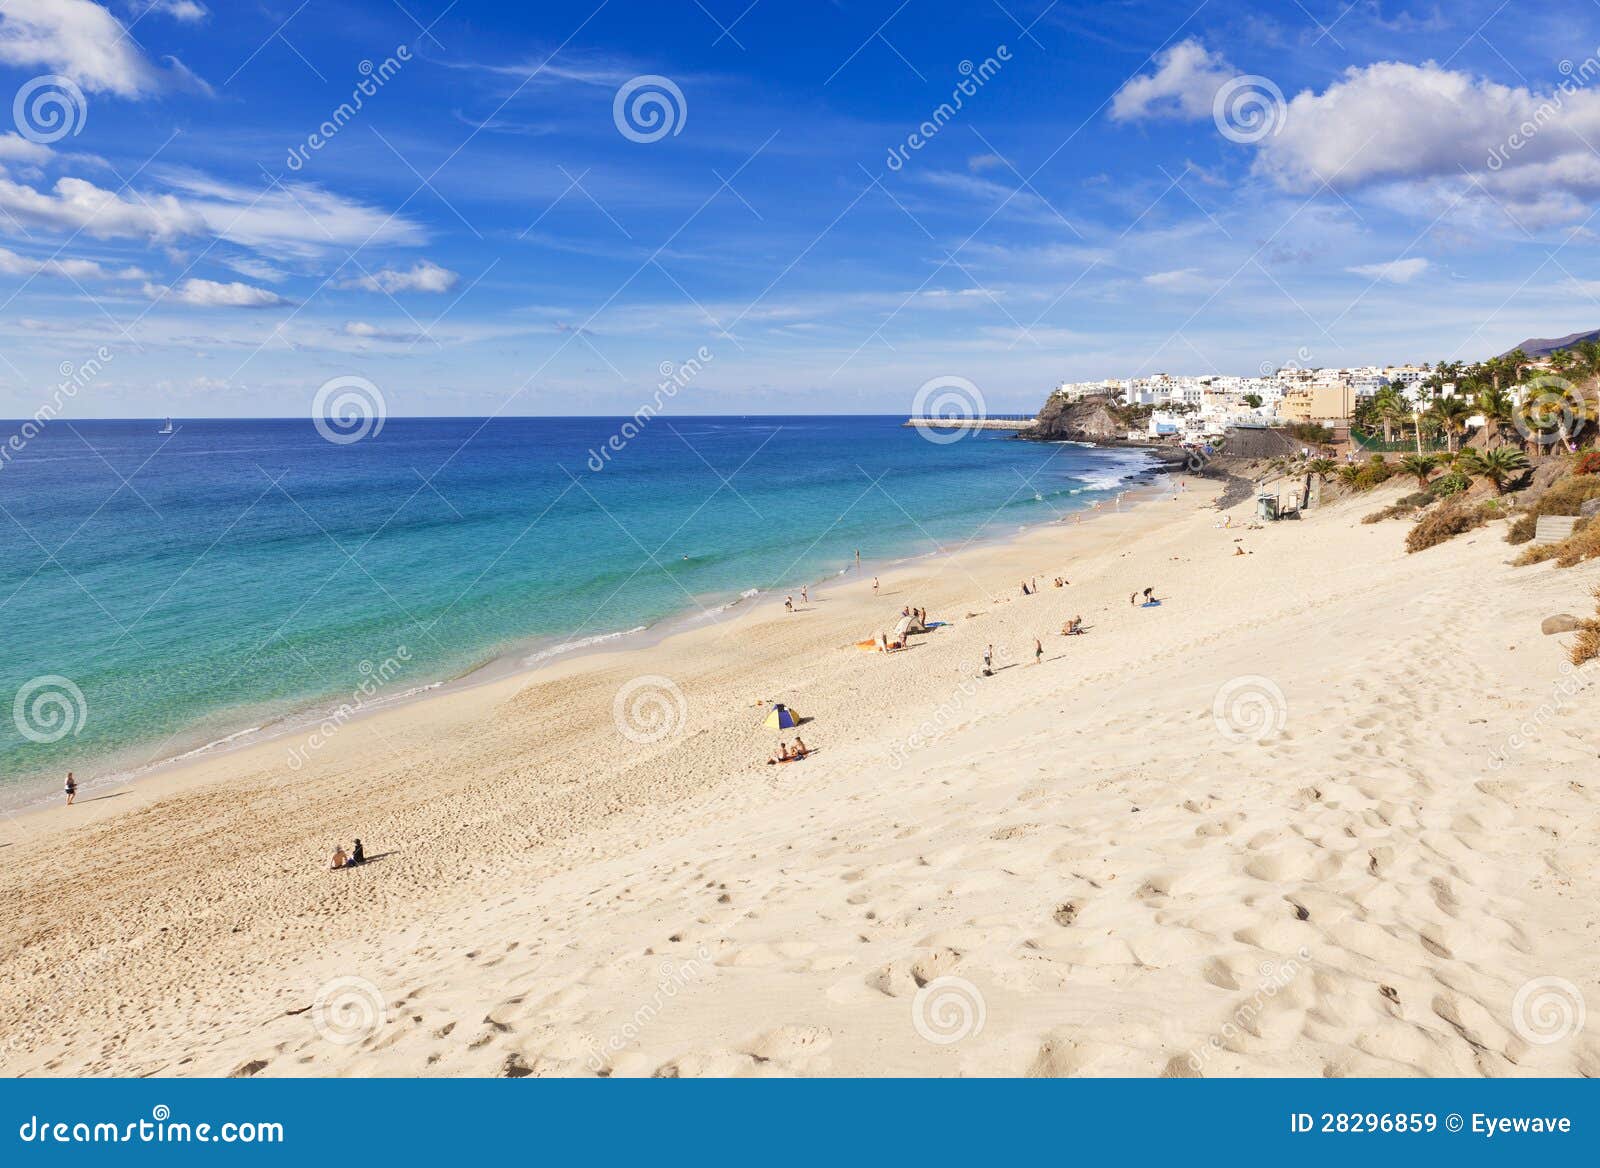 Jandia Beach And The Old Town Of Morro Jable Stock Image Image